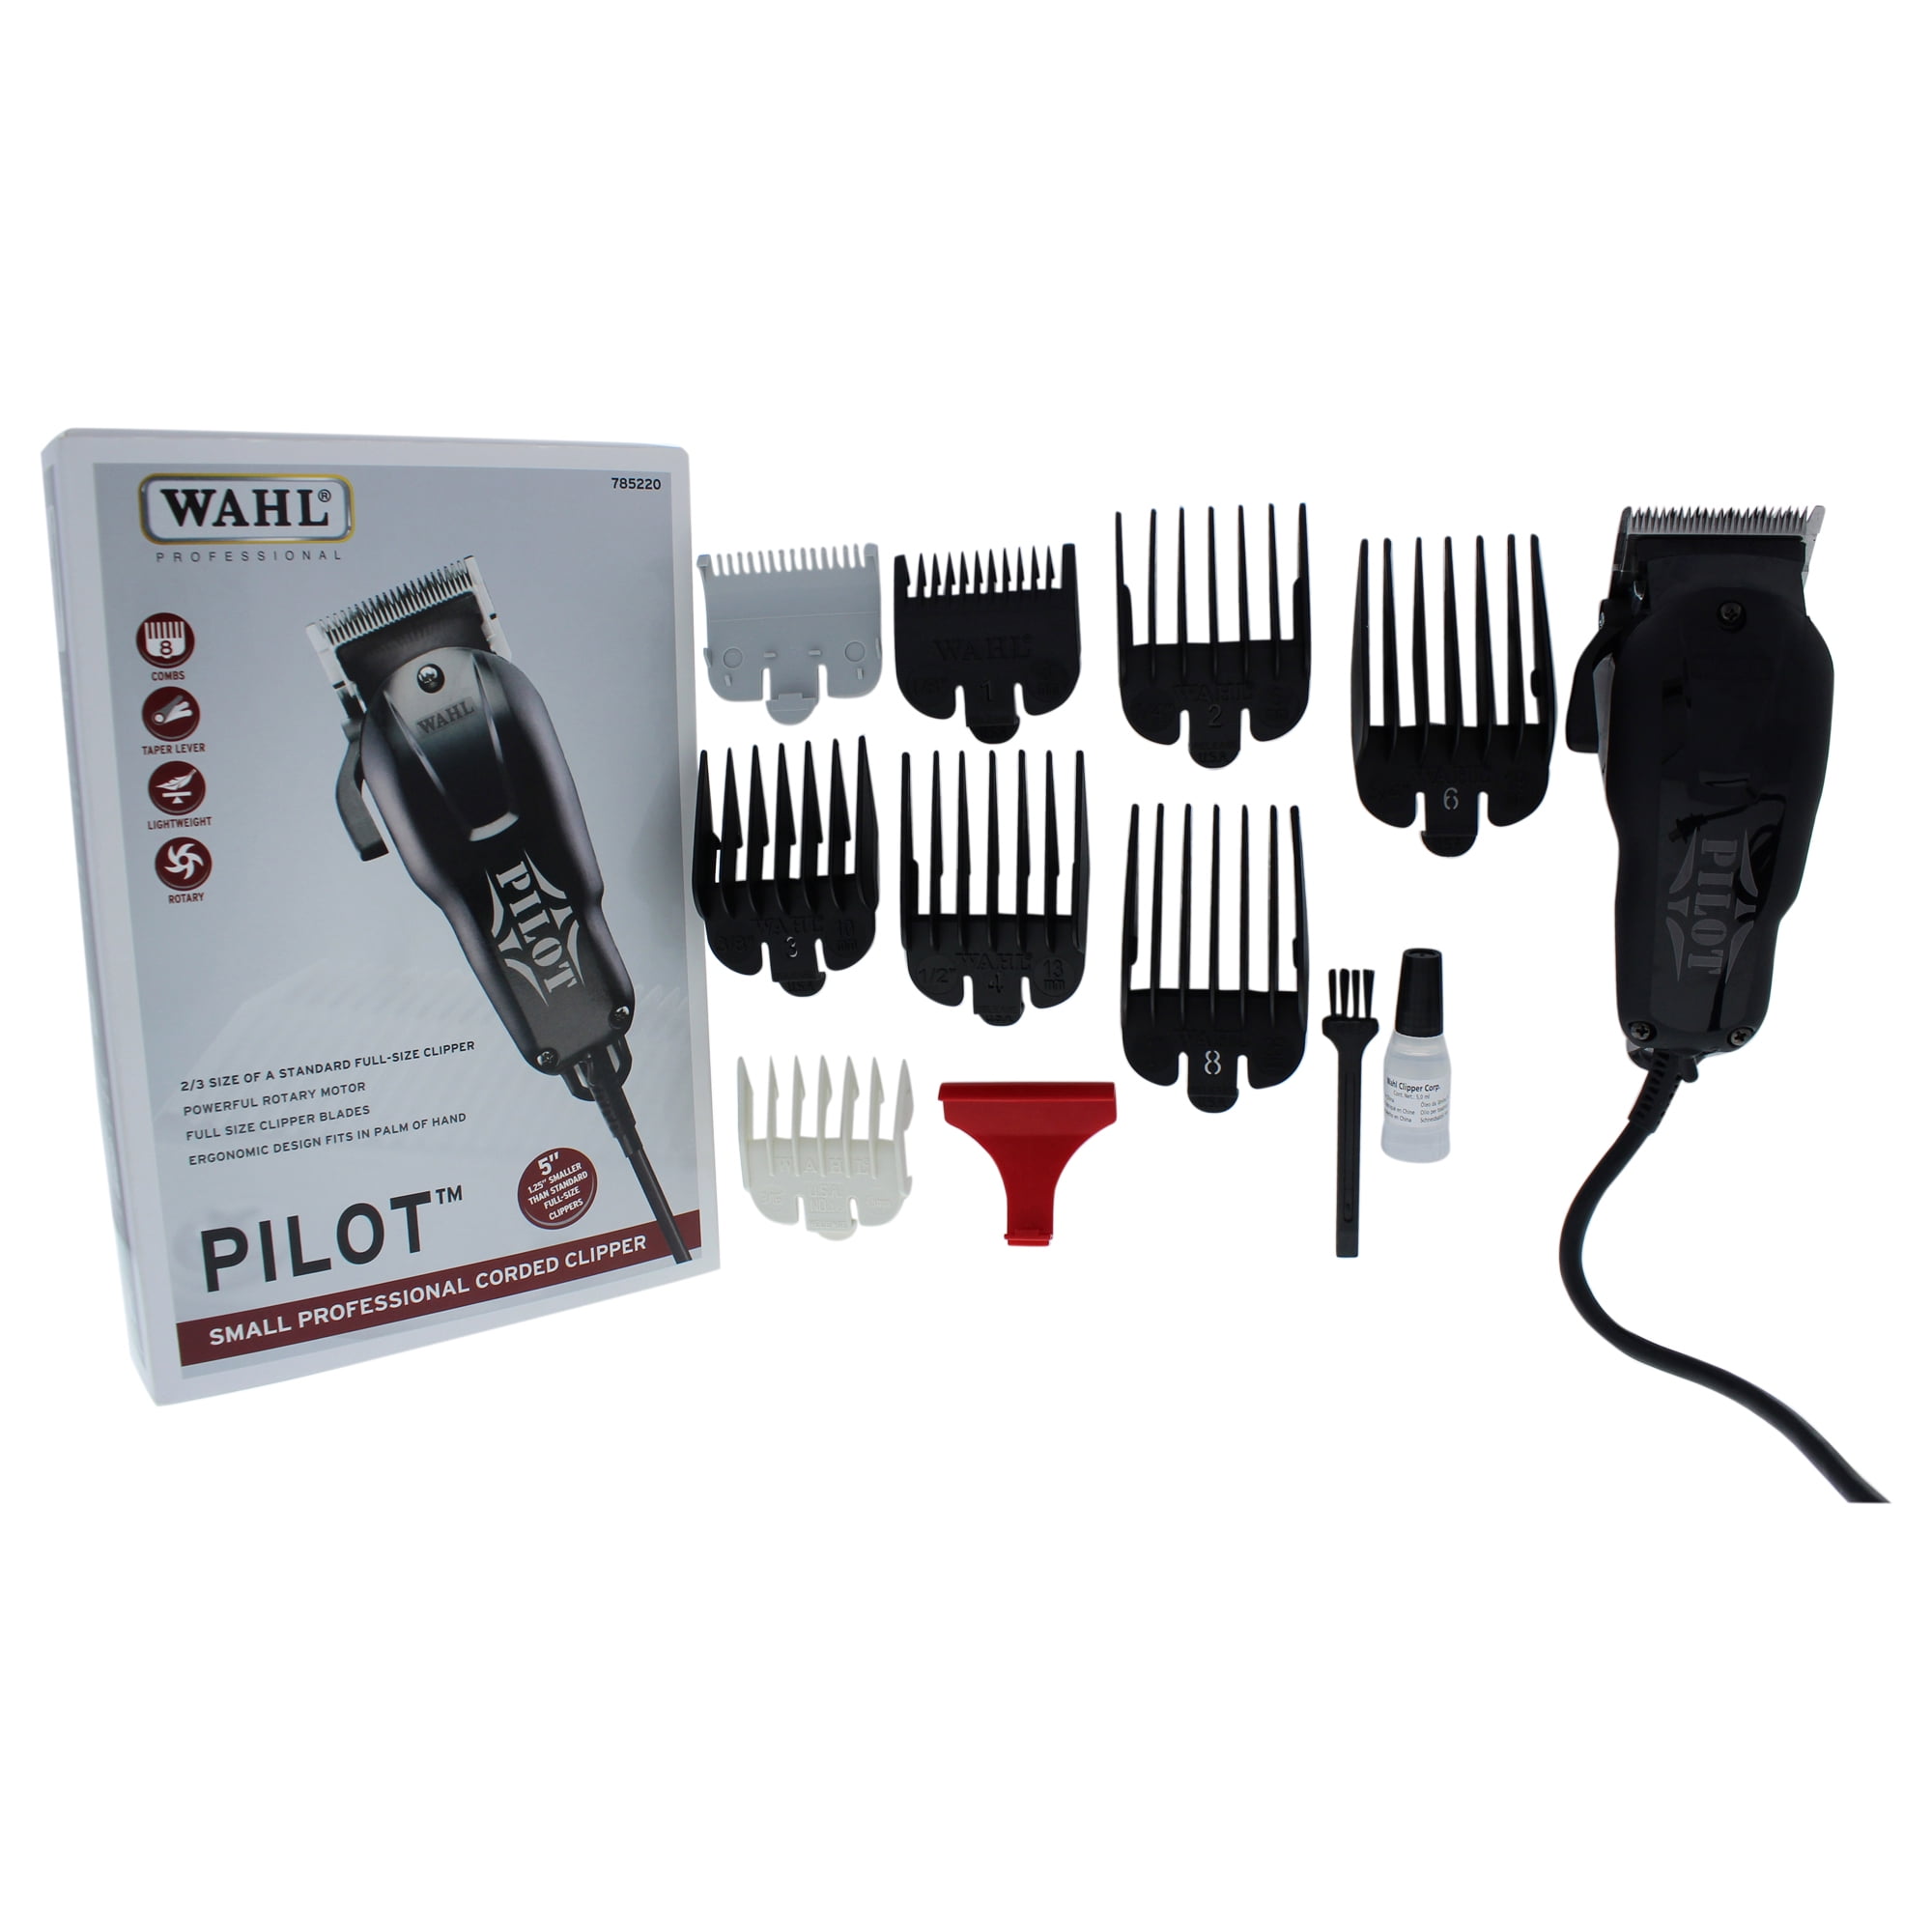 wahl pilot hair clippers